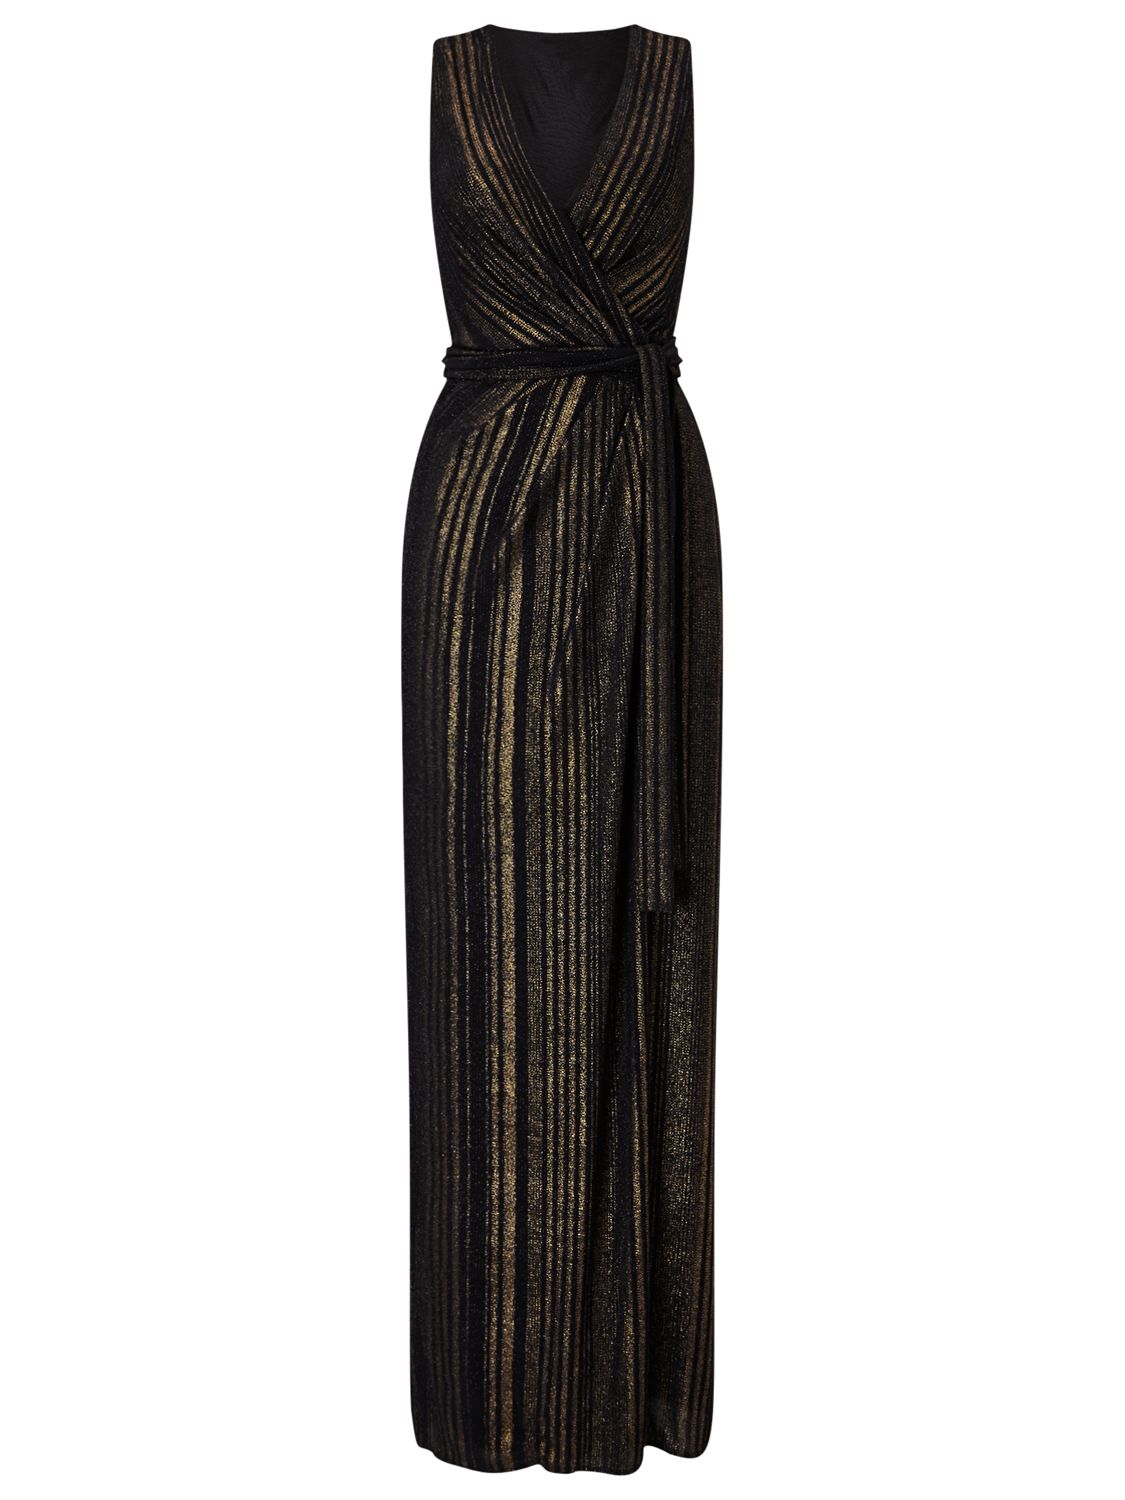 phase eight black and gold dress